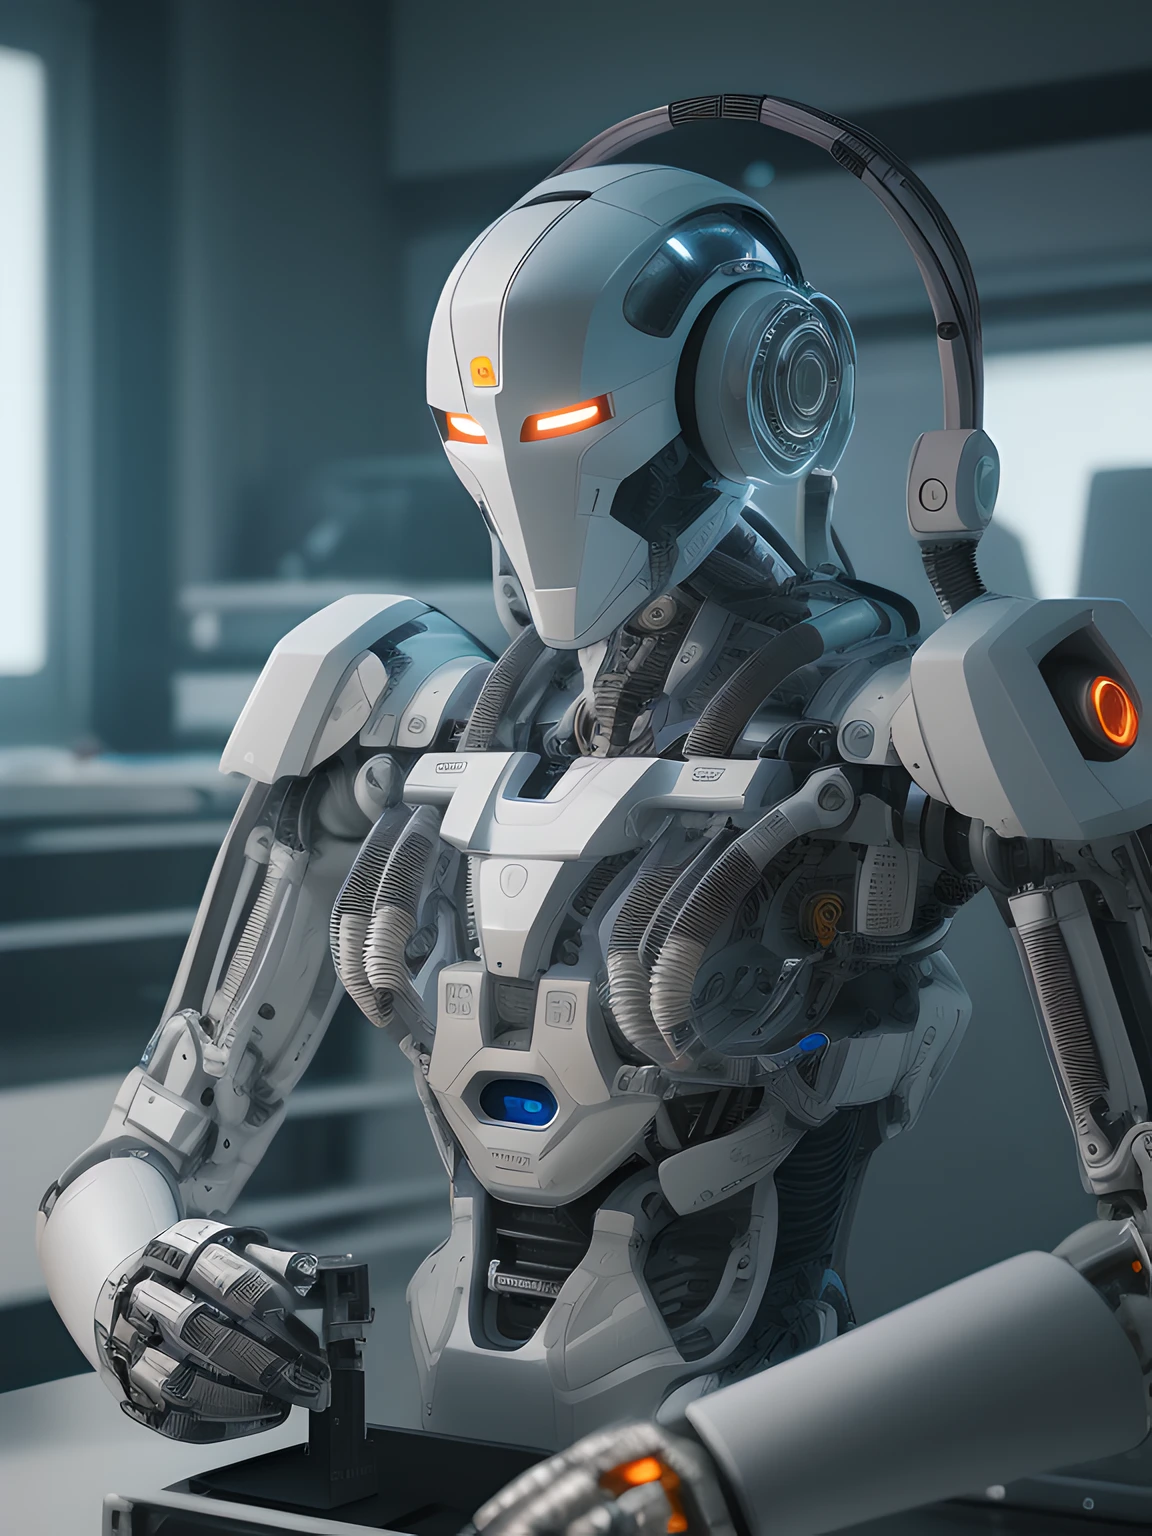 Intelligent bionic robot, male people, cyborg robot parts, The main body is fixed on the workbench for maintenance,  Many cables and wires are attached behind the body, micro Chip, Bright Studio, hyper photorealism, Highly detailed, Intricate details, softlighting, rim-light, rendering by octane, unreal engine 5 render, Mechanical public enemy style, 8K, Best quality, Masterpiece, Low ISO, White balance，high key lighting，Creates a soft and ethereal feel, with a shallow depth of field